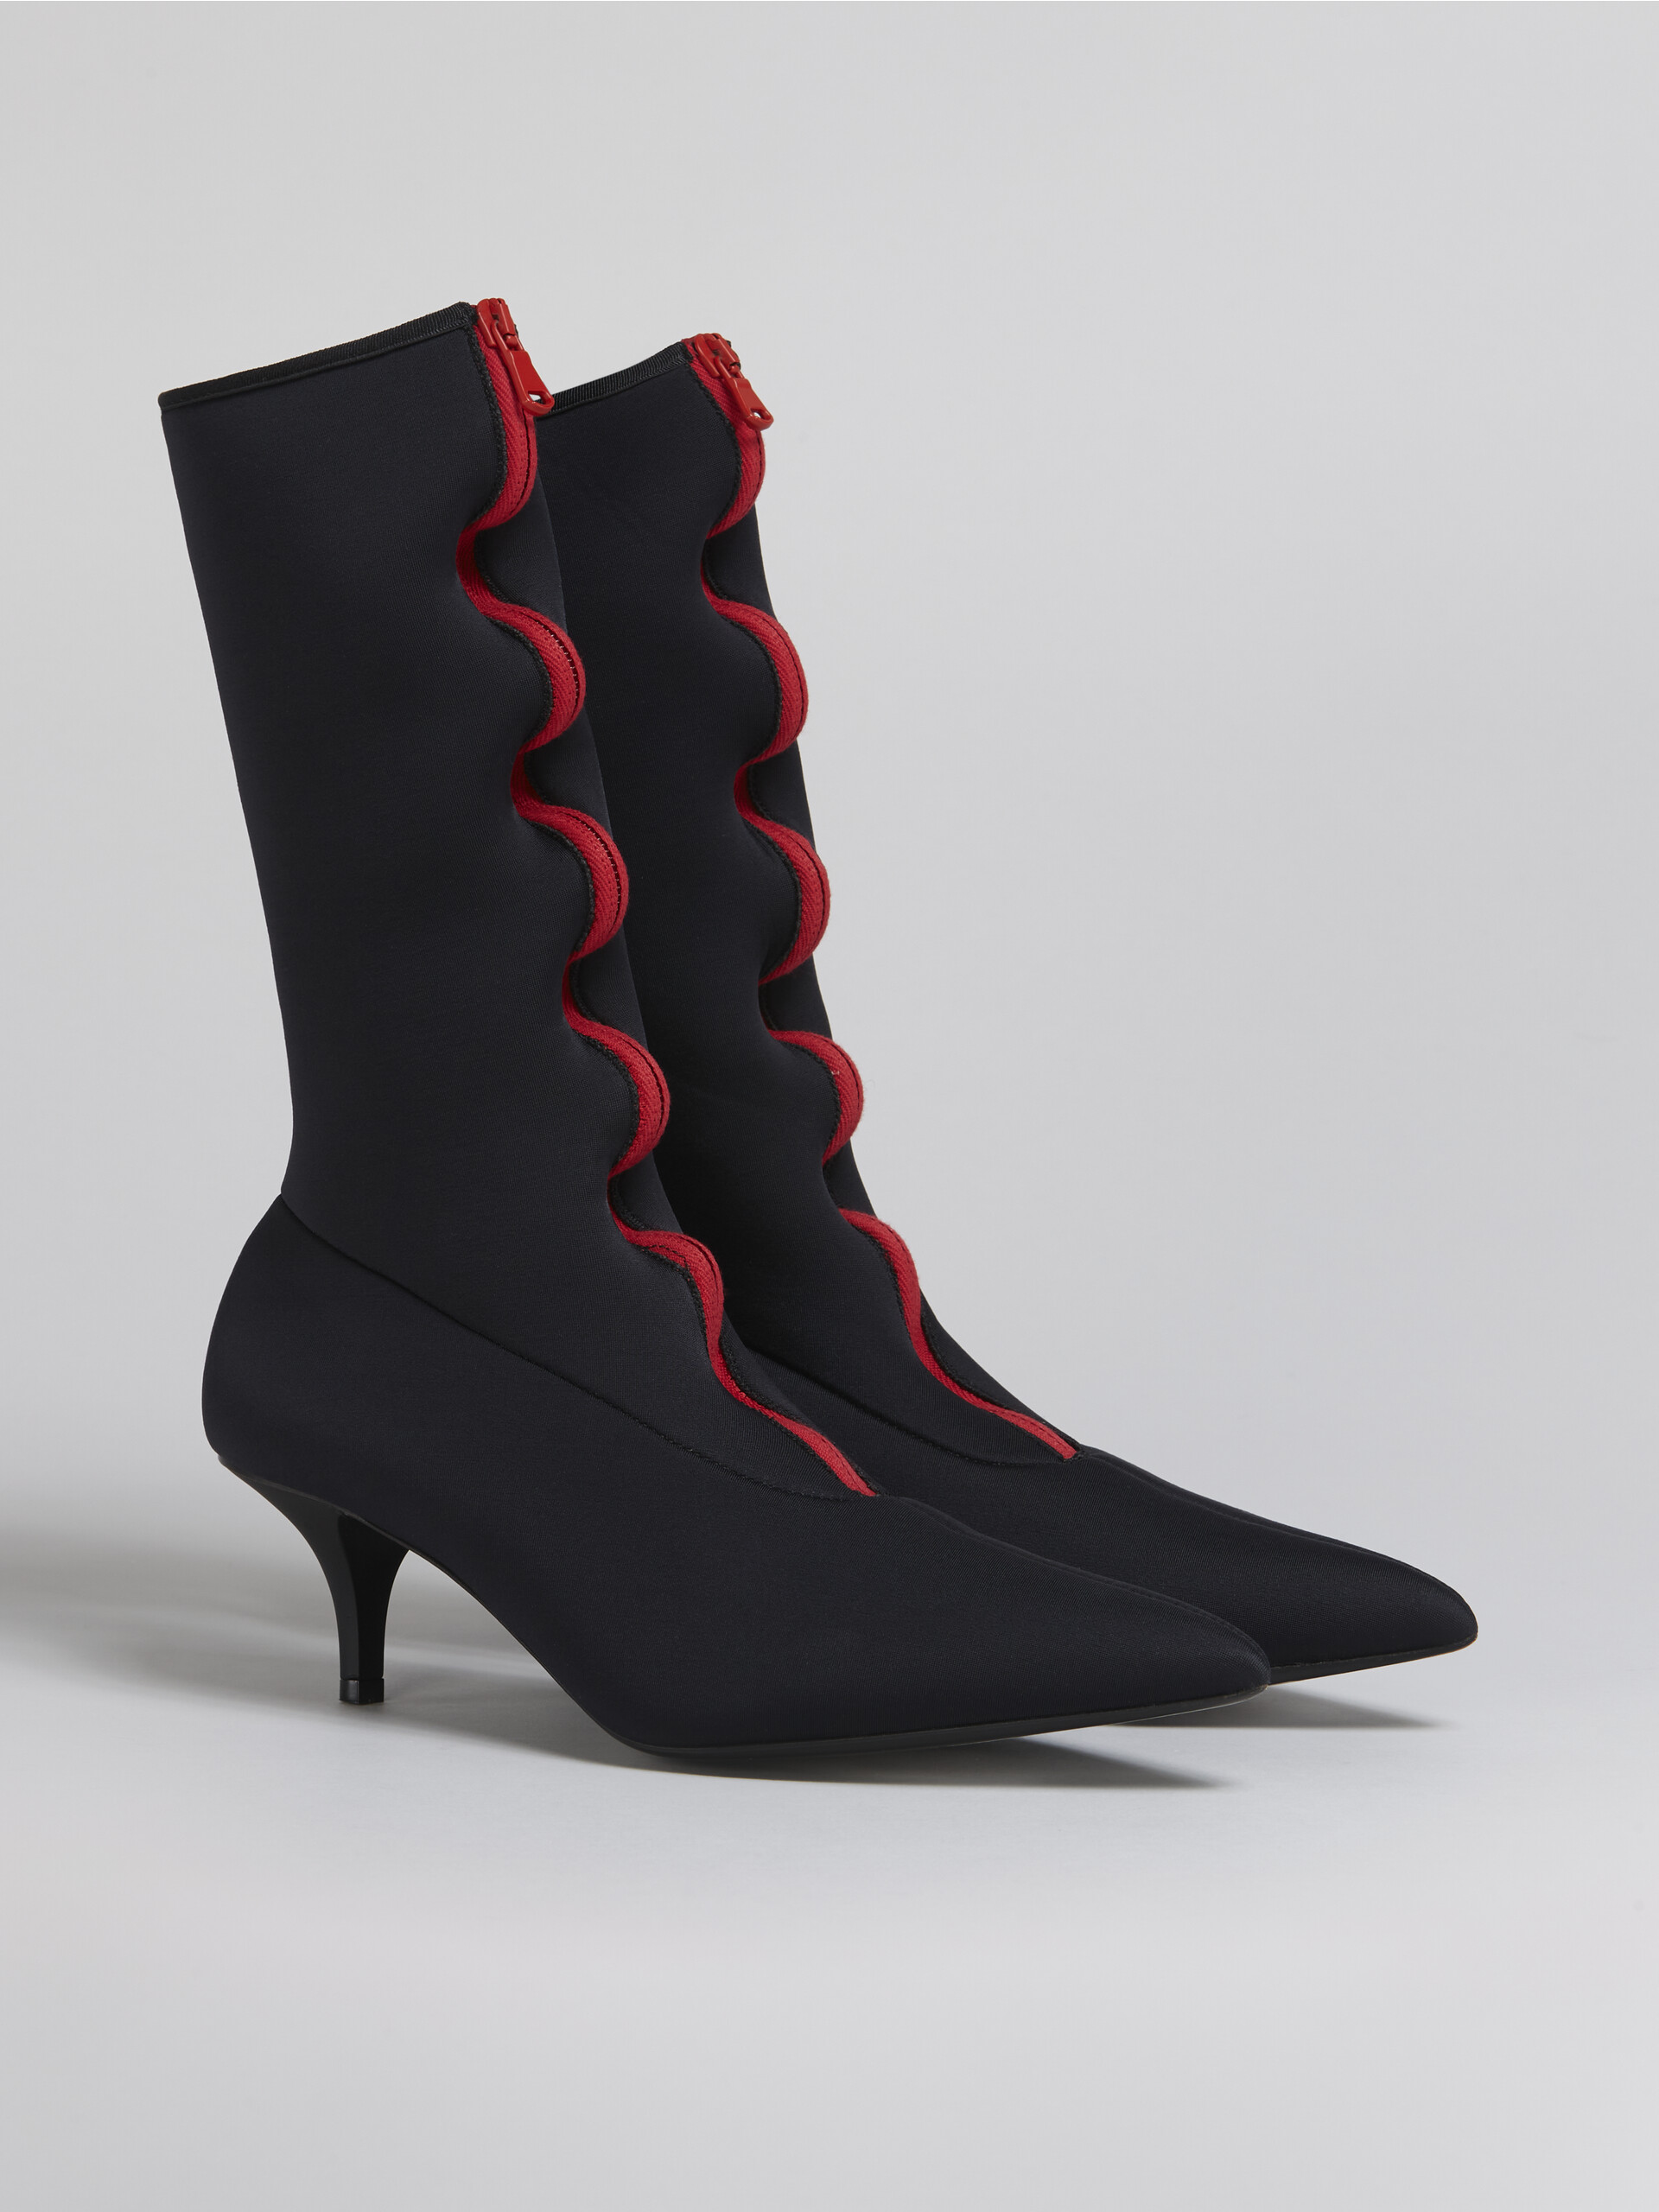 Pointed bootie in stretch neoprene - Boots - Image 2